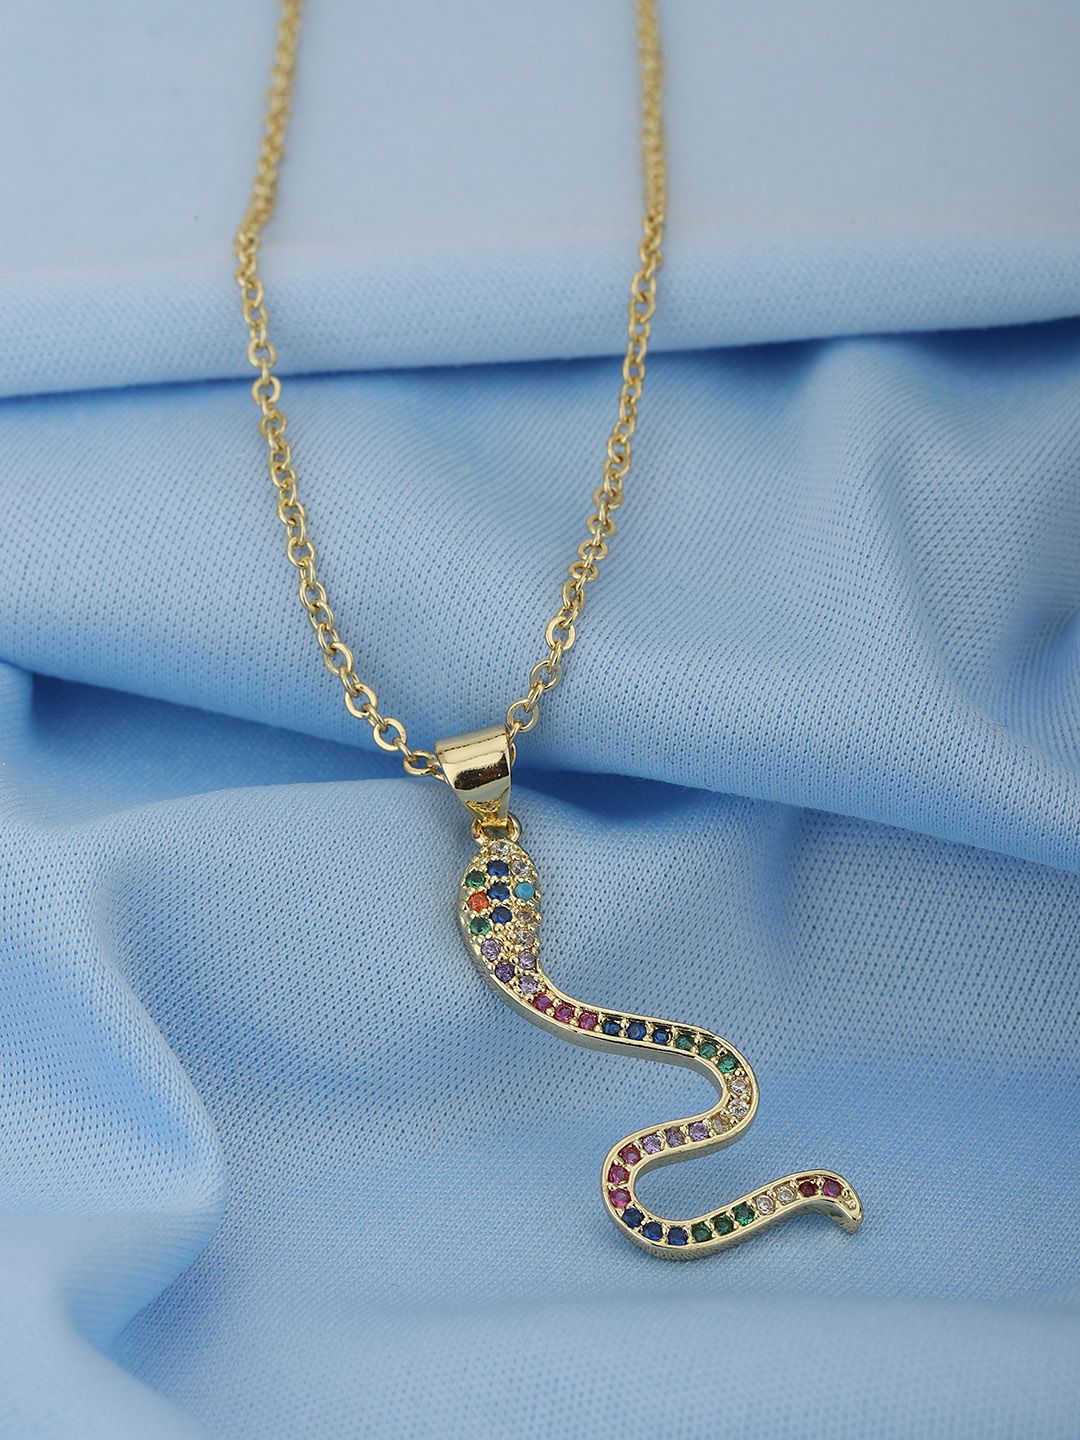 Carlton London Gold-Plated CZ-Studded Snake-Shaped Necklace Price in India